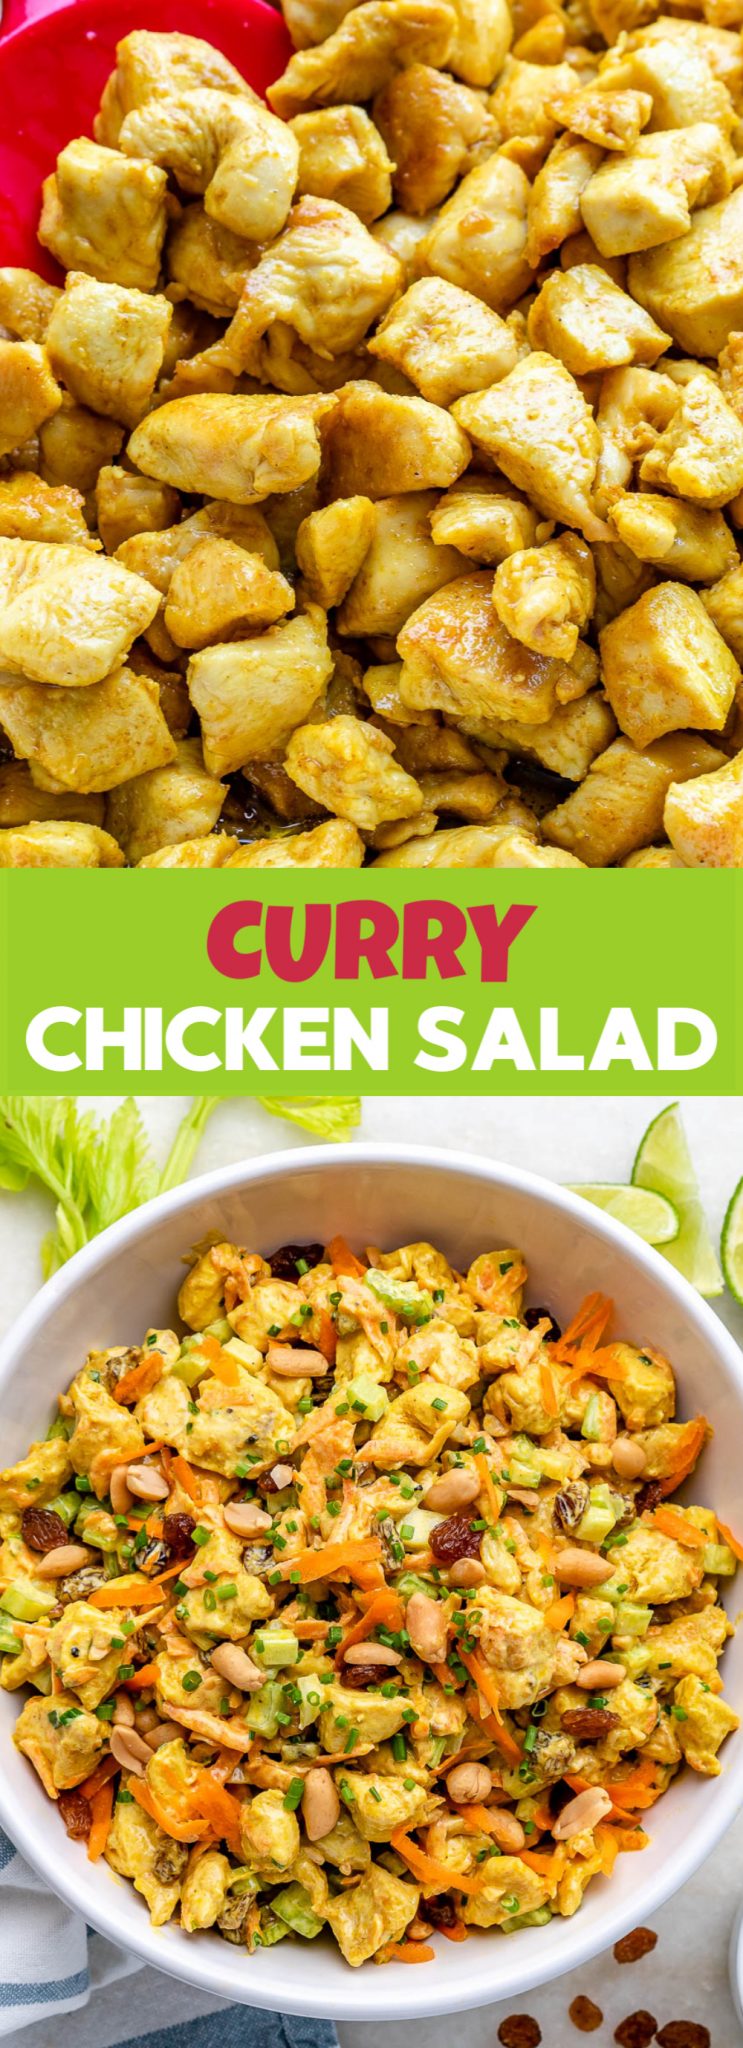 https://cleanfoodcrush.com/wp-content/uploads/2020/06/CleanFoodCrush-Printable-Healthy-Recipe-Curry-Chicken-Salad-scaled.jpg